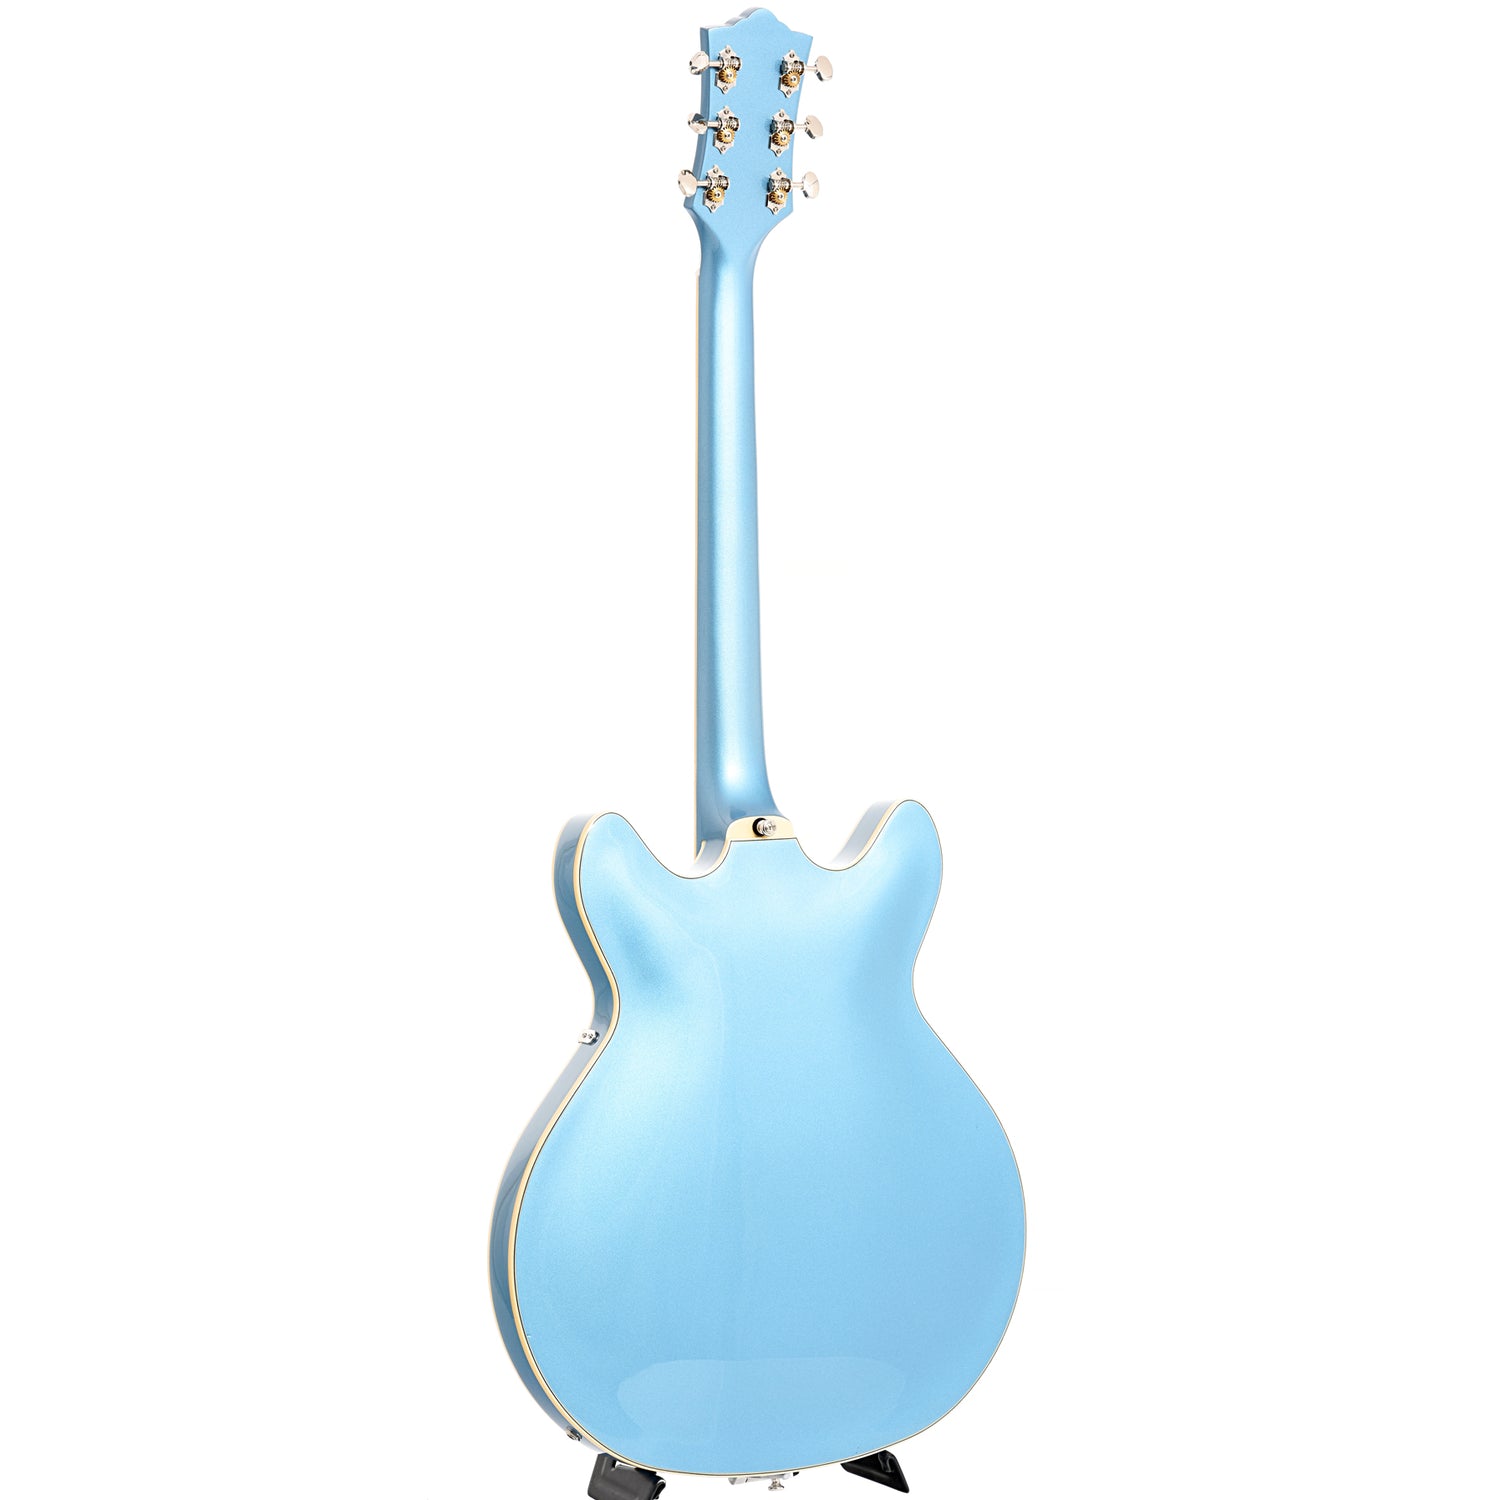 Image 12 of Guild Starfire I Double Cutaway Semi-Hollow Body Guitar with Vibrato, Pelham Blue- SKU# GSF1DCV-BLU : Product Type Hollow Body Electric Guitars : Elderly Instruments